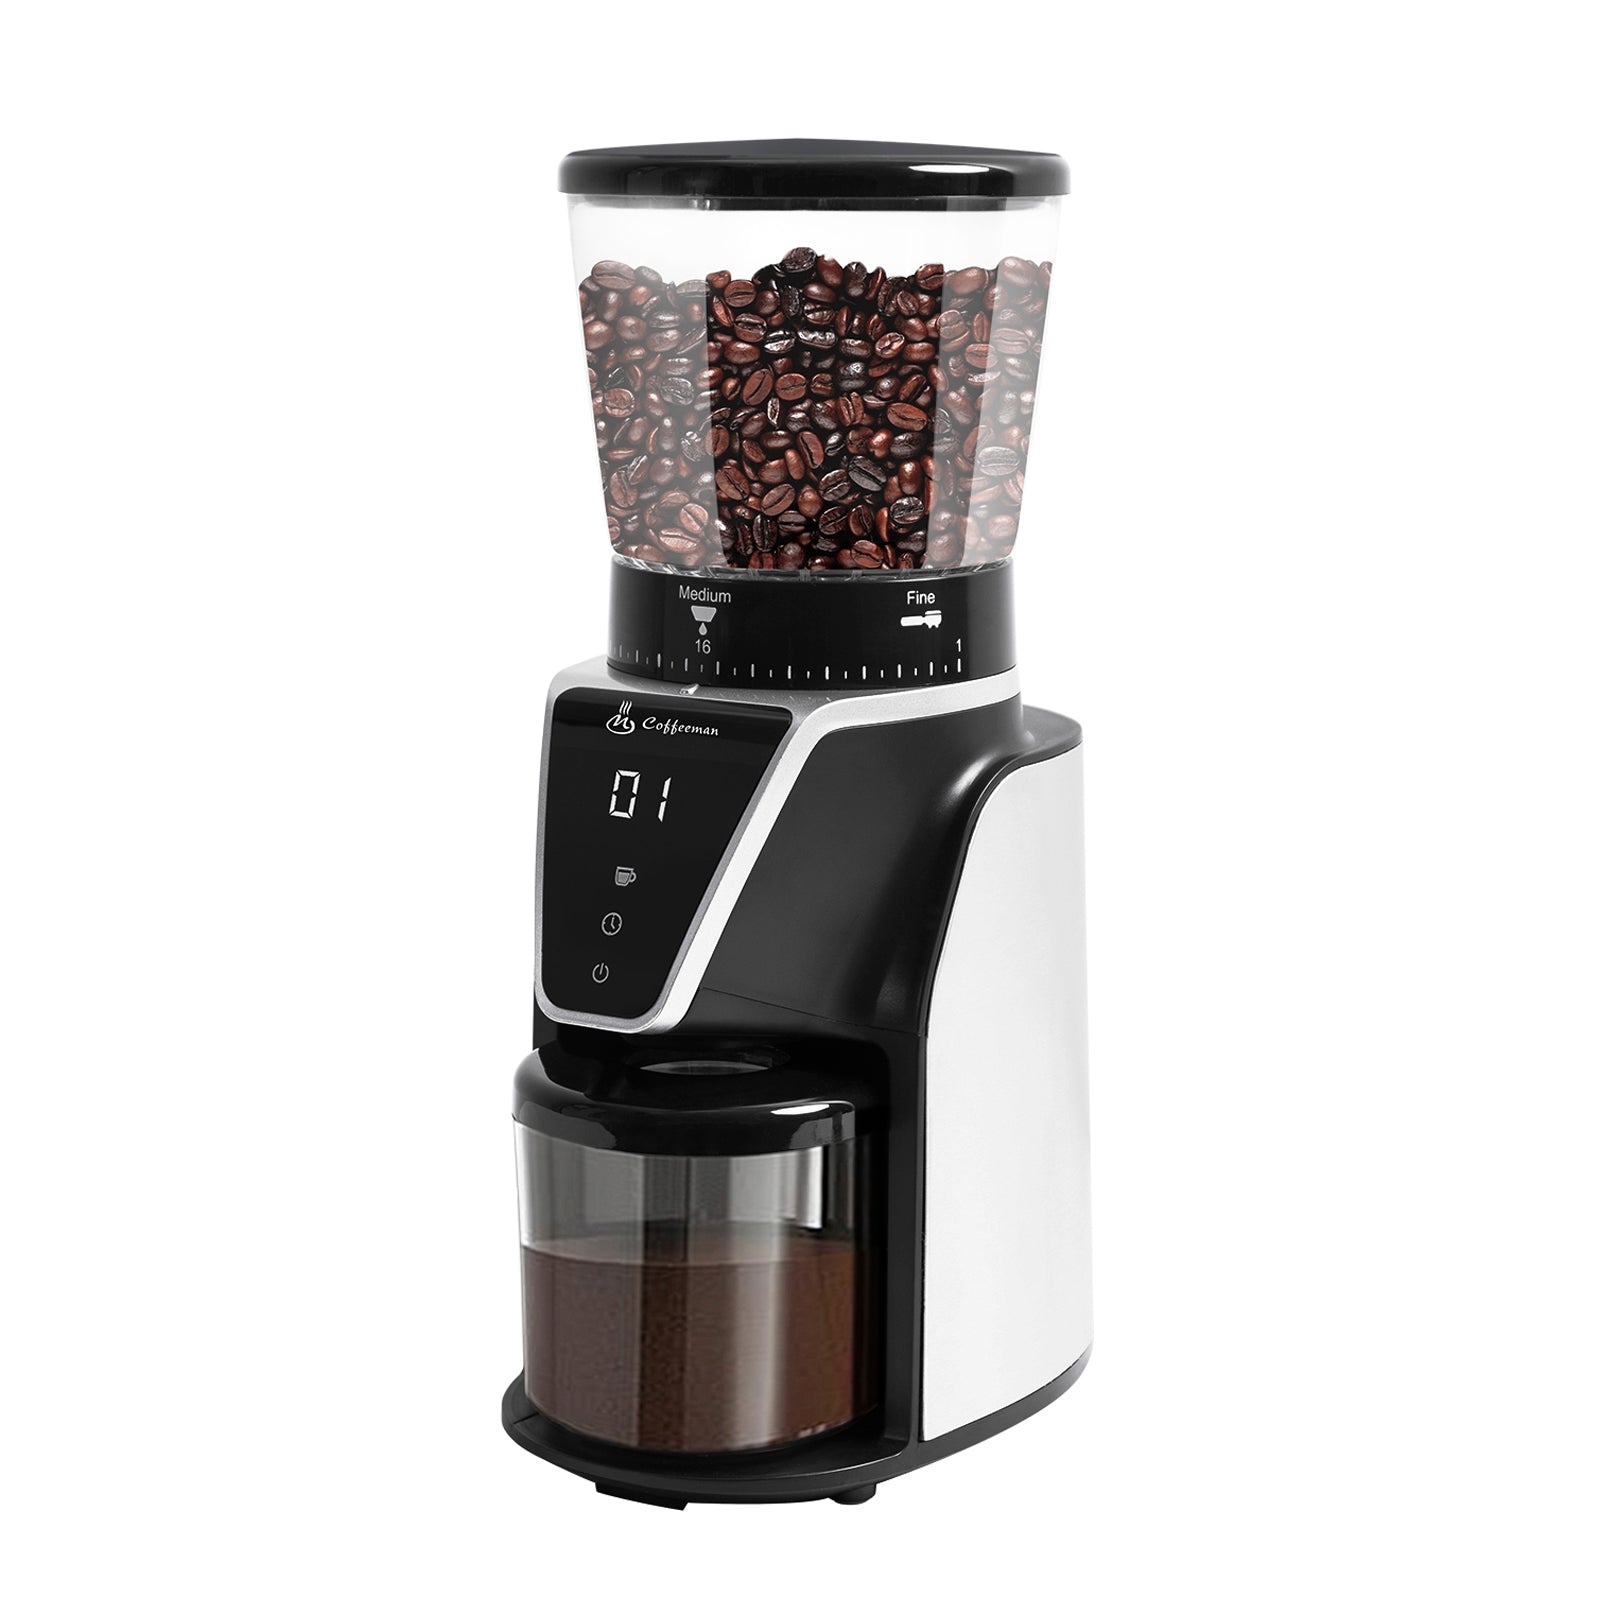 High Performance Coffee Bean Grinder with Precise & Consistent Grind